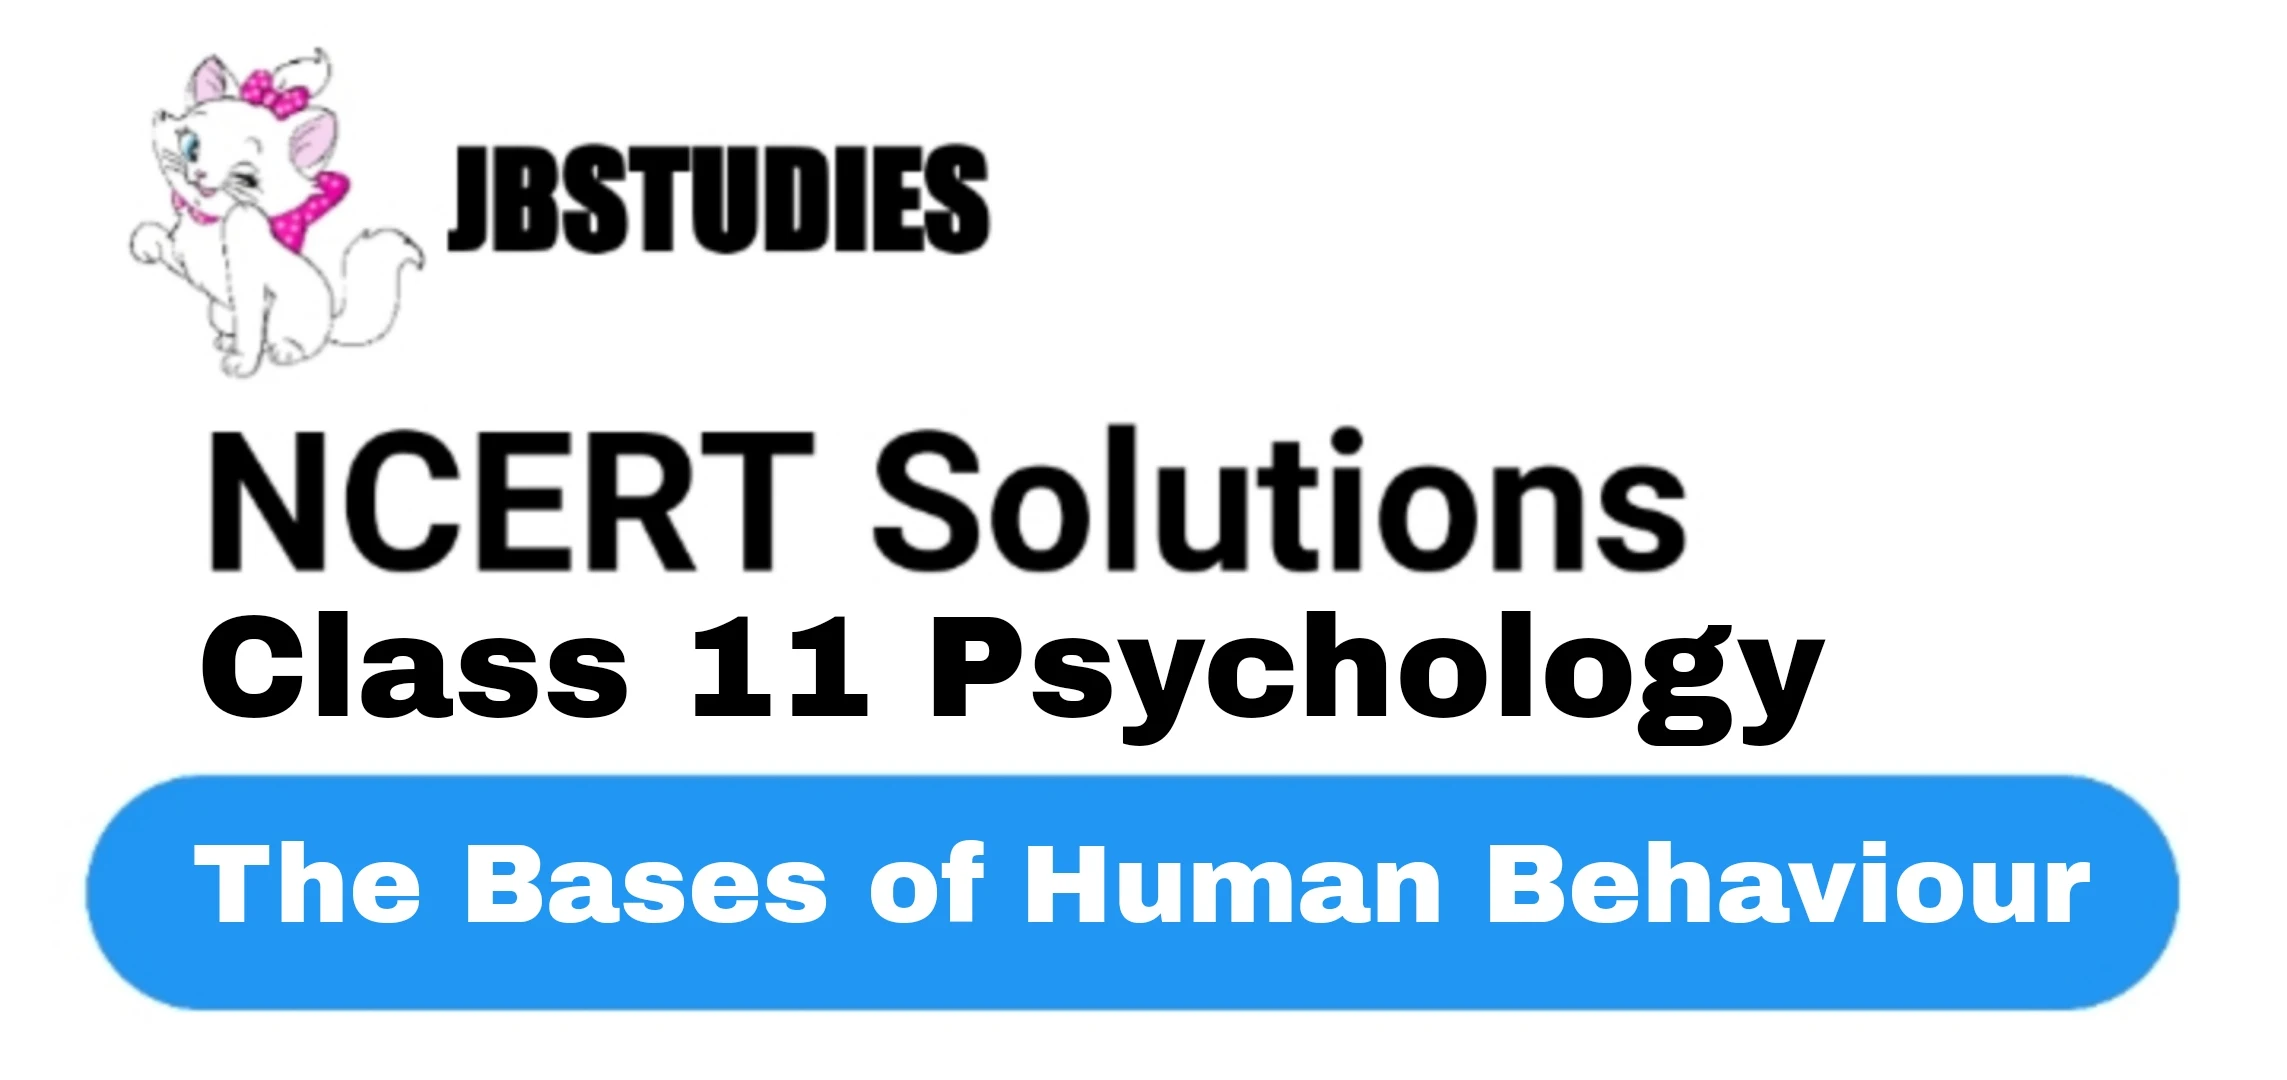 Solutions Class 11 Psychology Chapter -3 (The Bases of Human Behaviour)